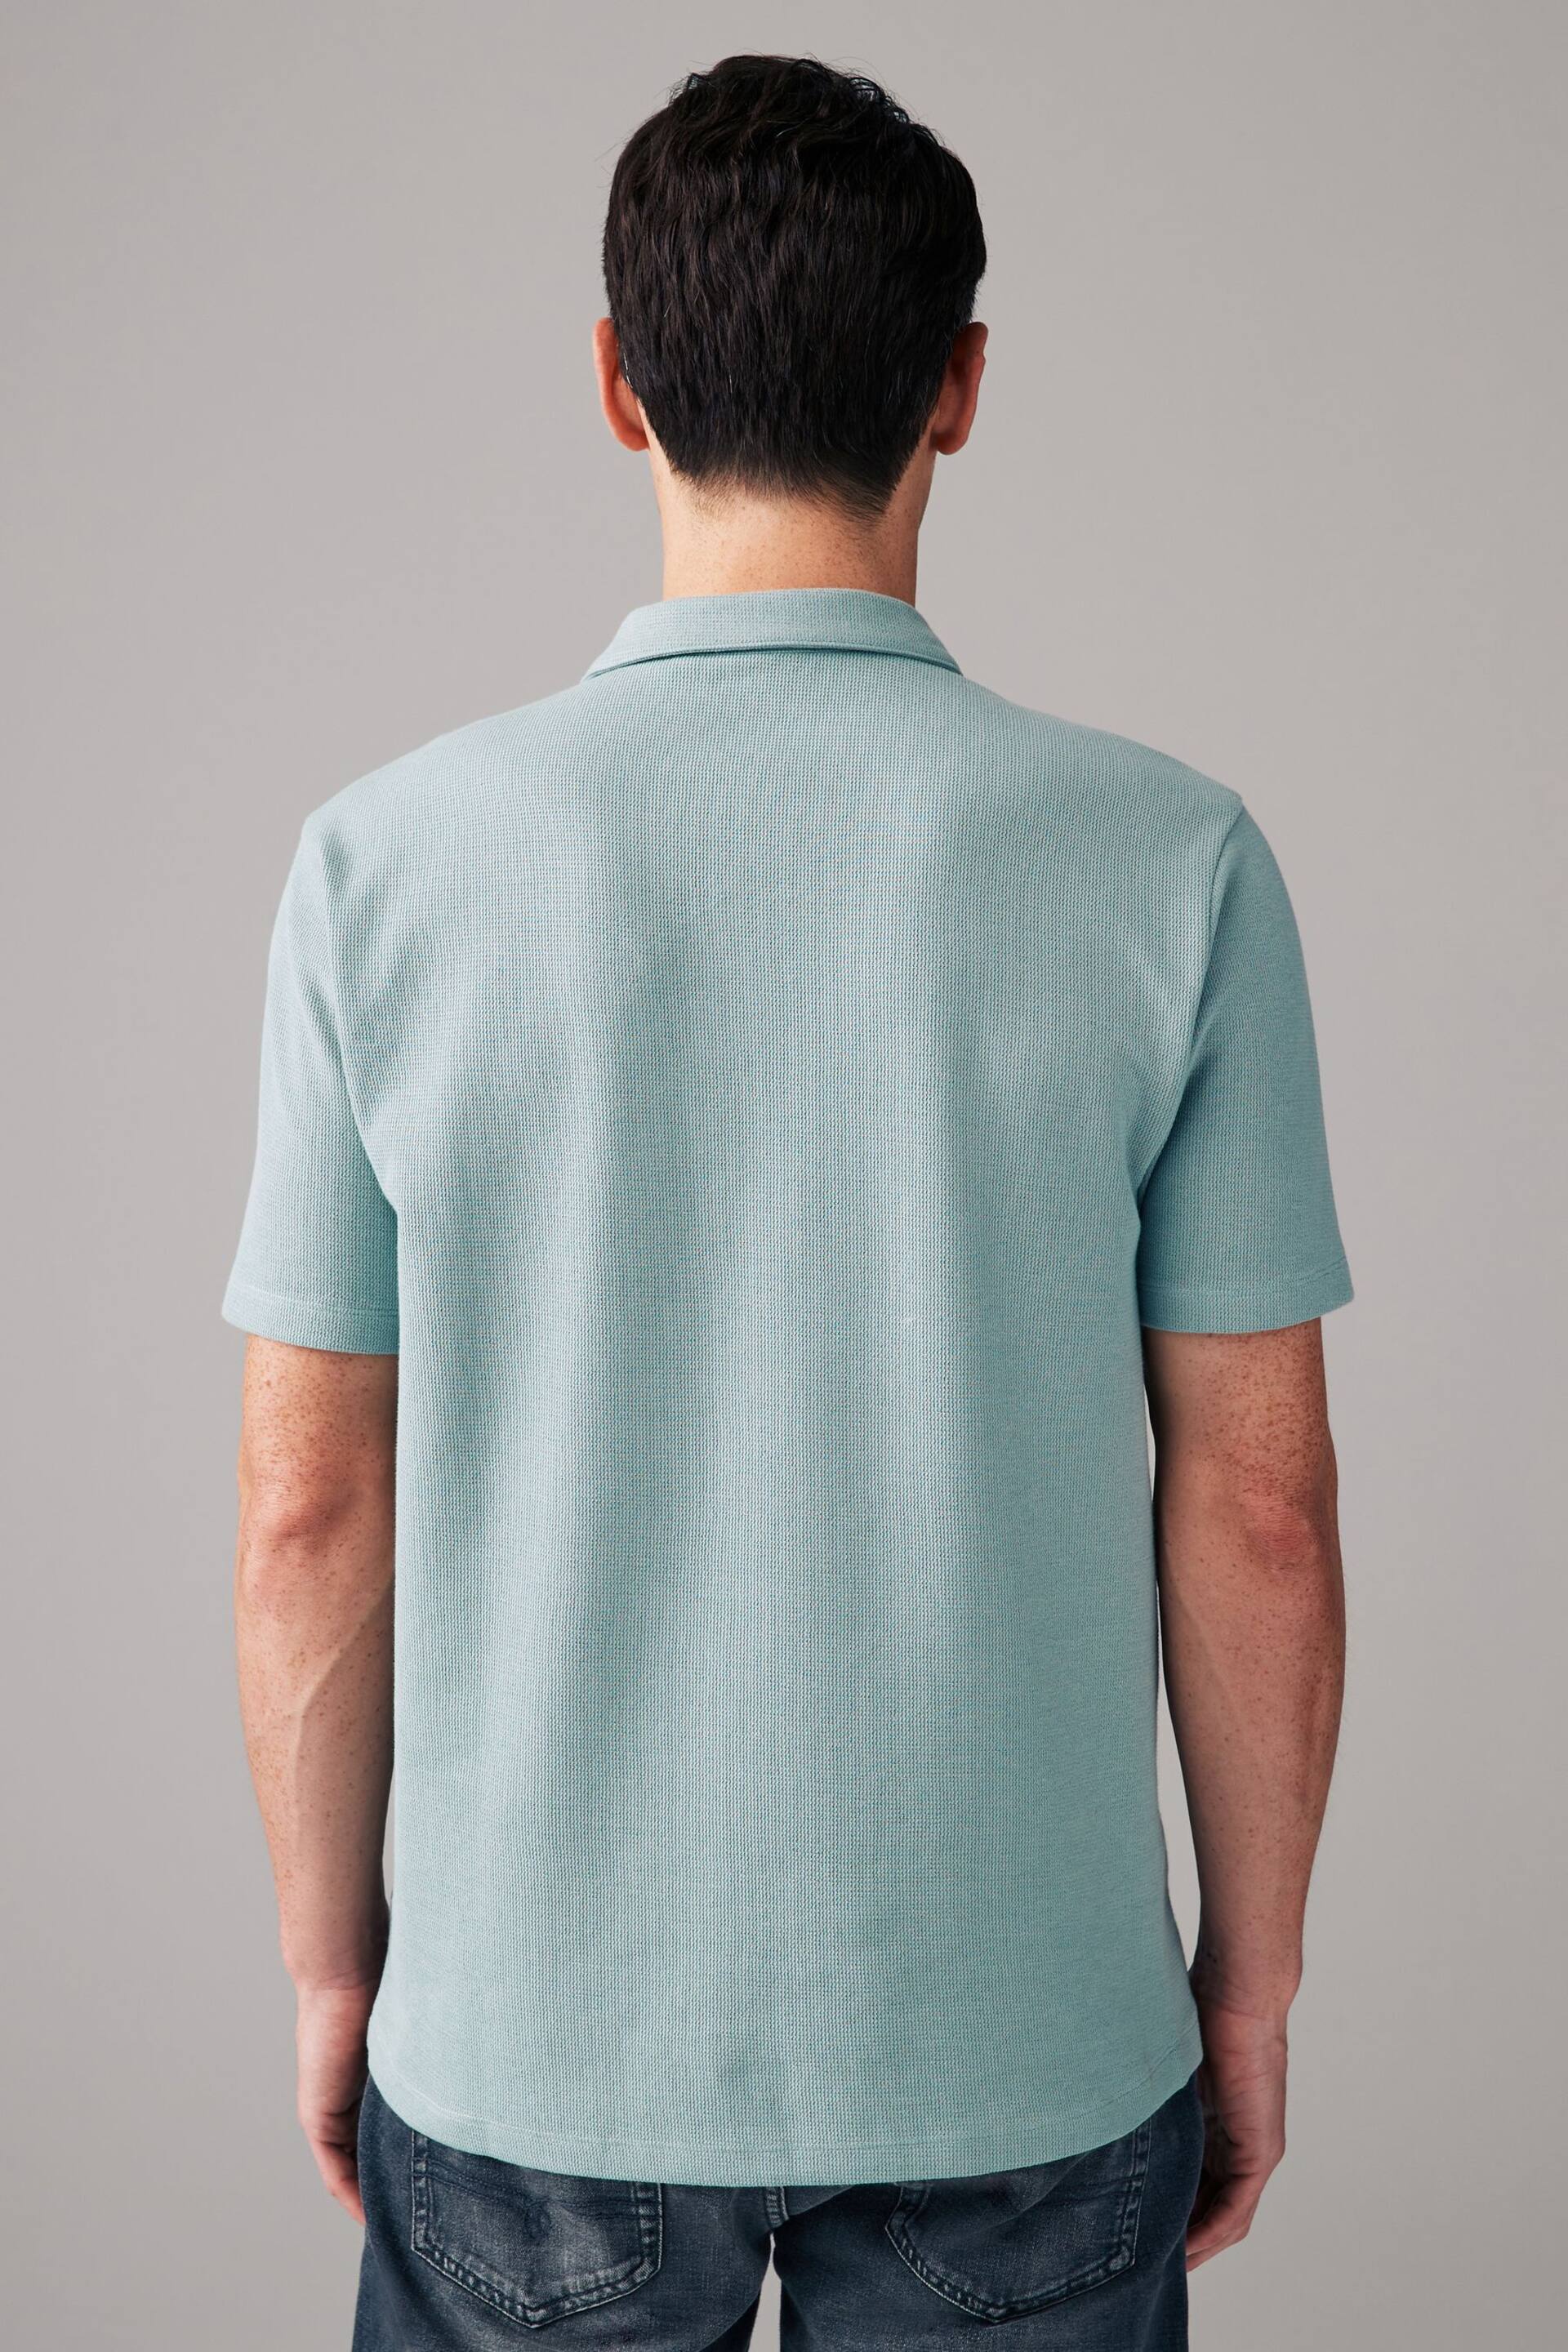 Green Textured Short Sleeve Polo Shirt - Image 4 of 8